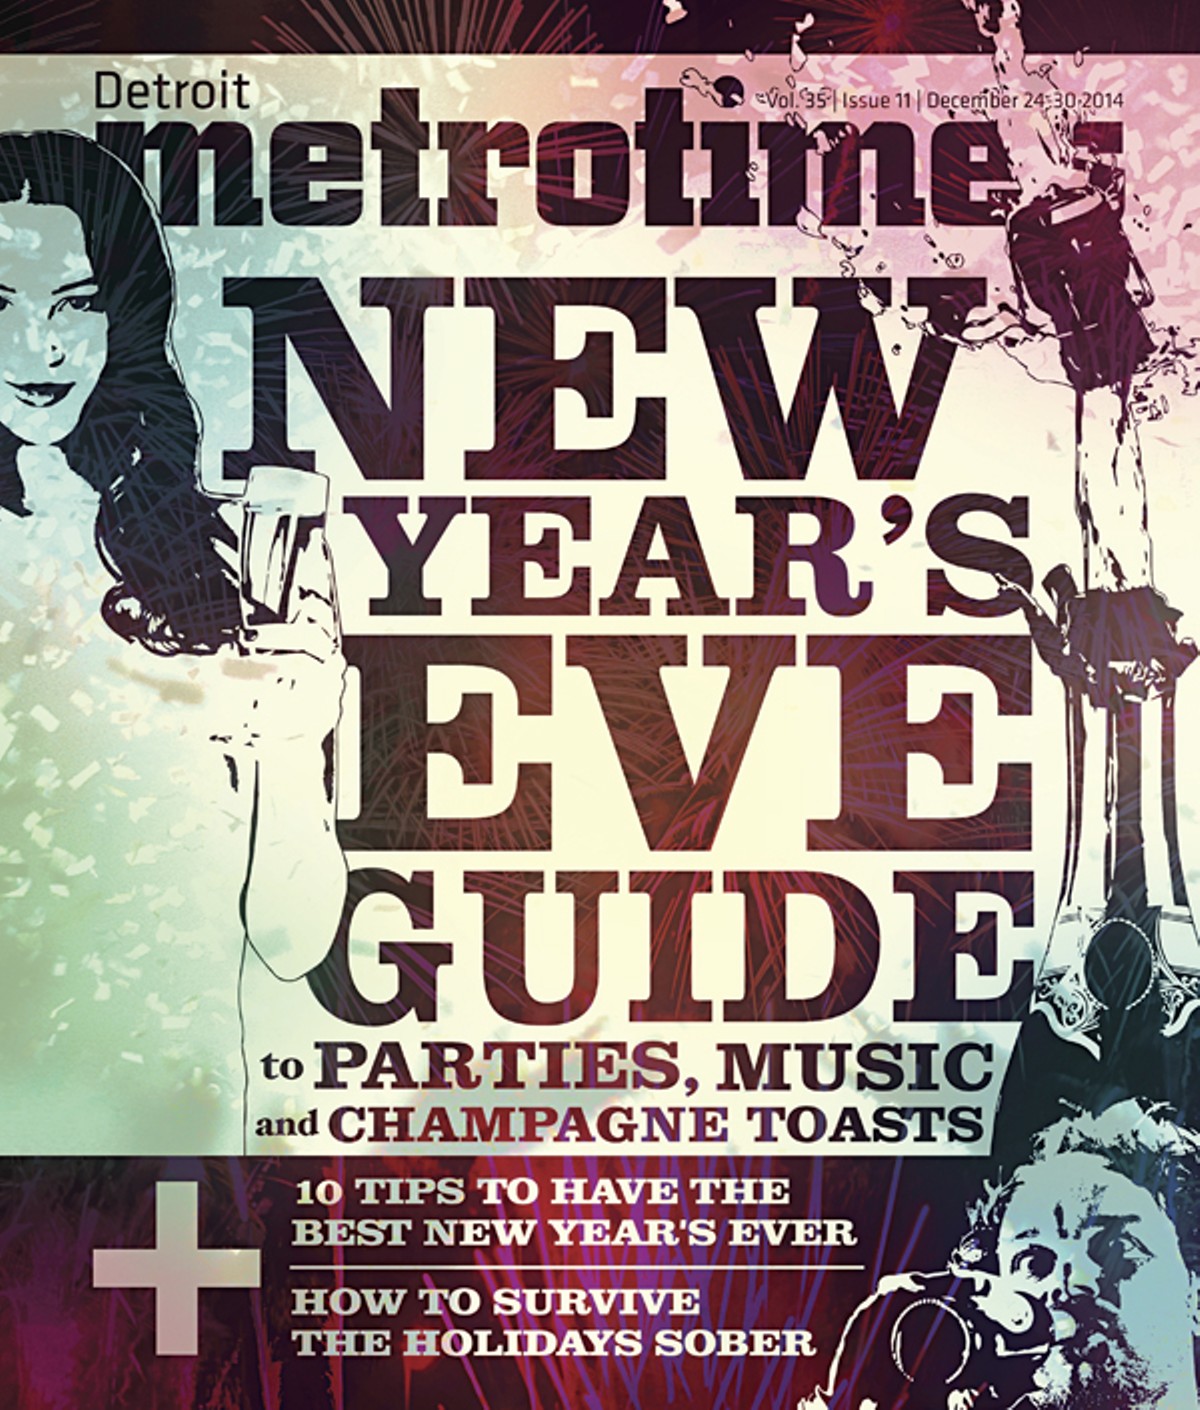 2015 New Year's Eve guide